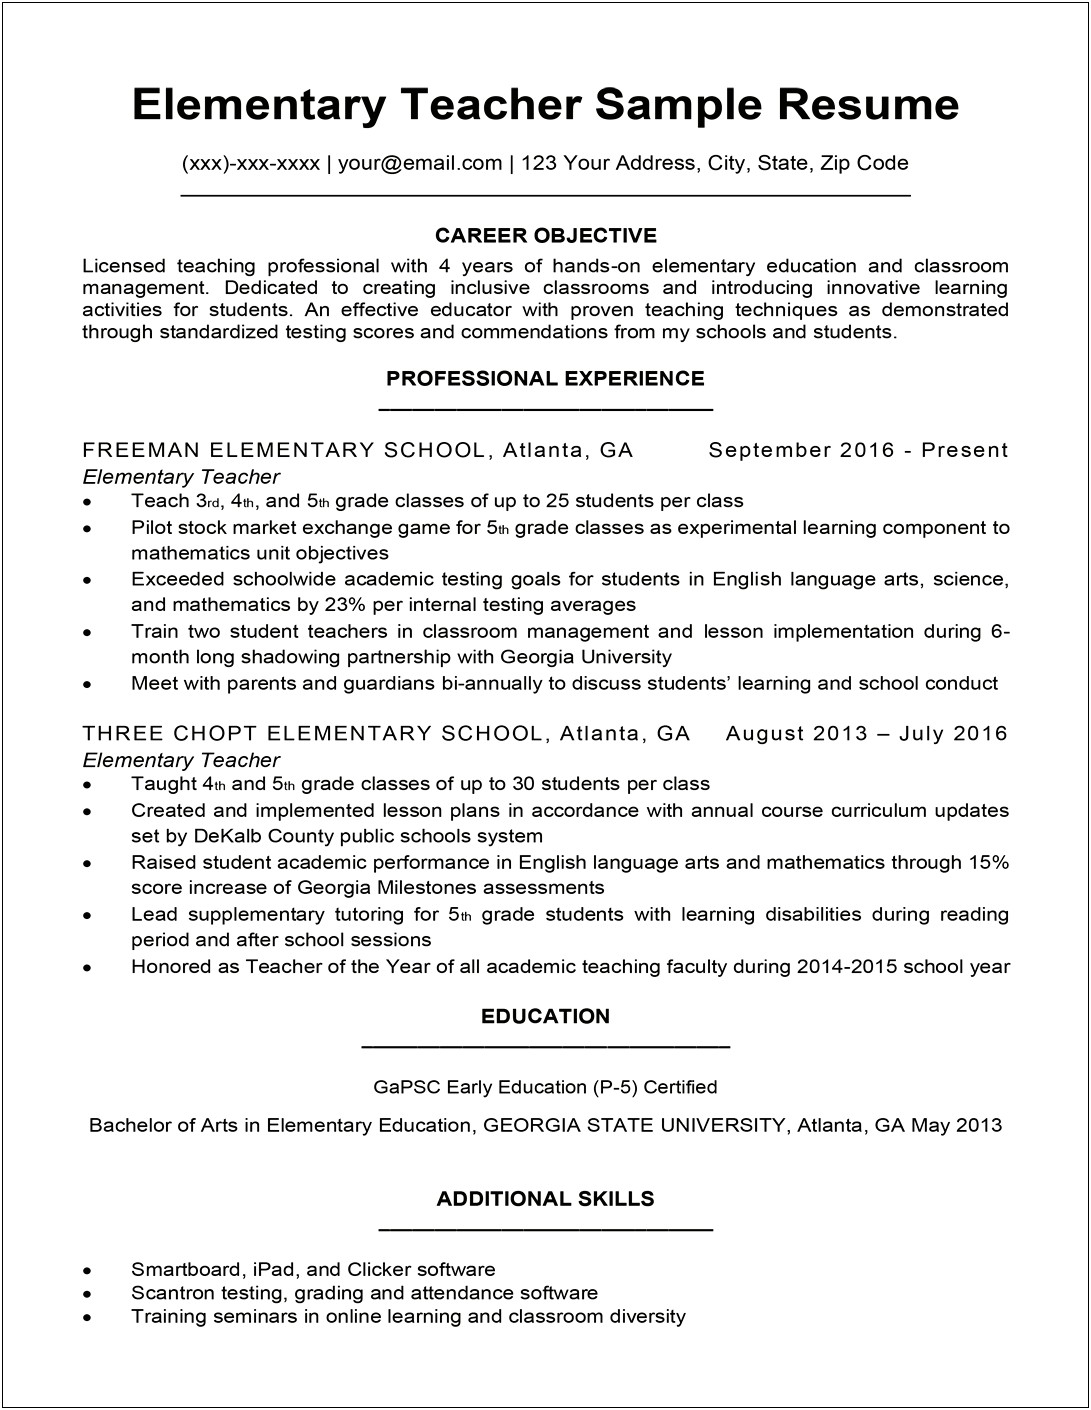 Professional Summary On Resume For Teaching